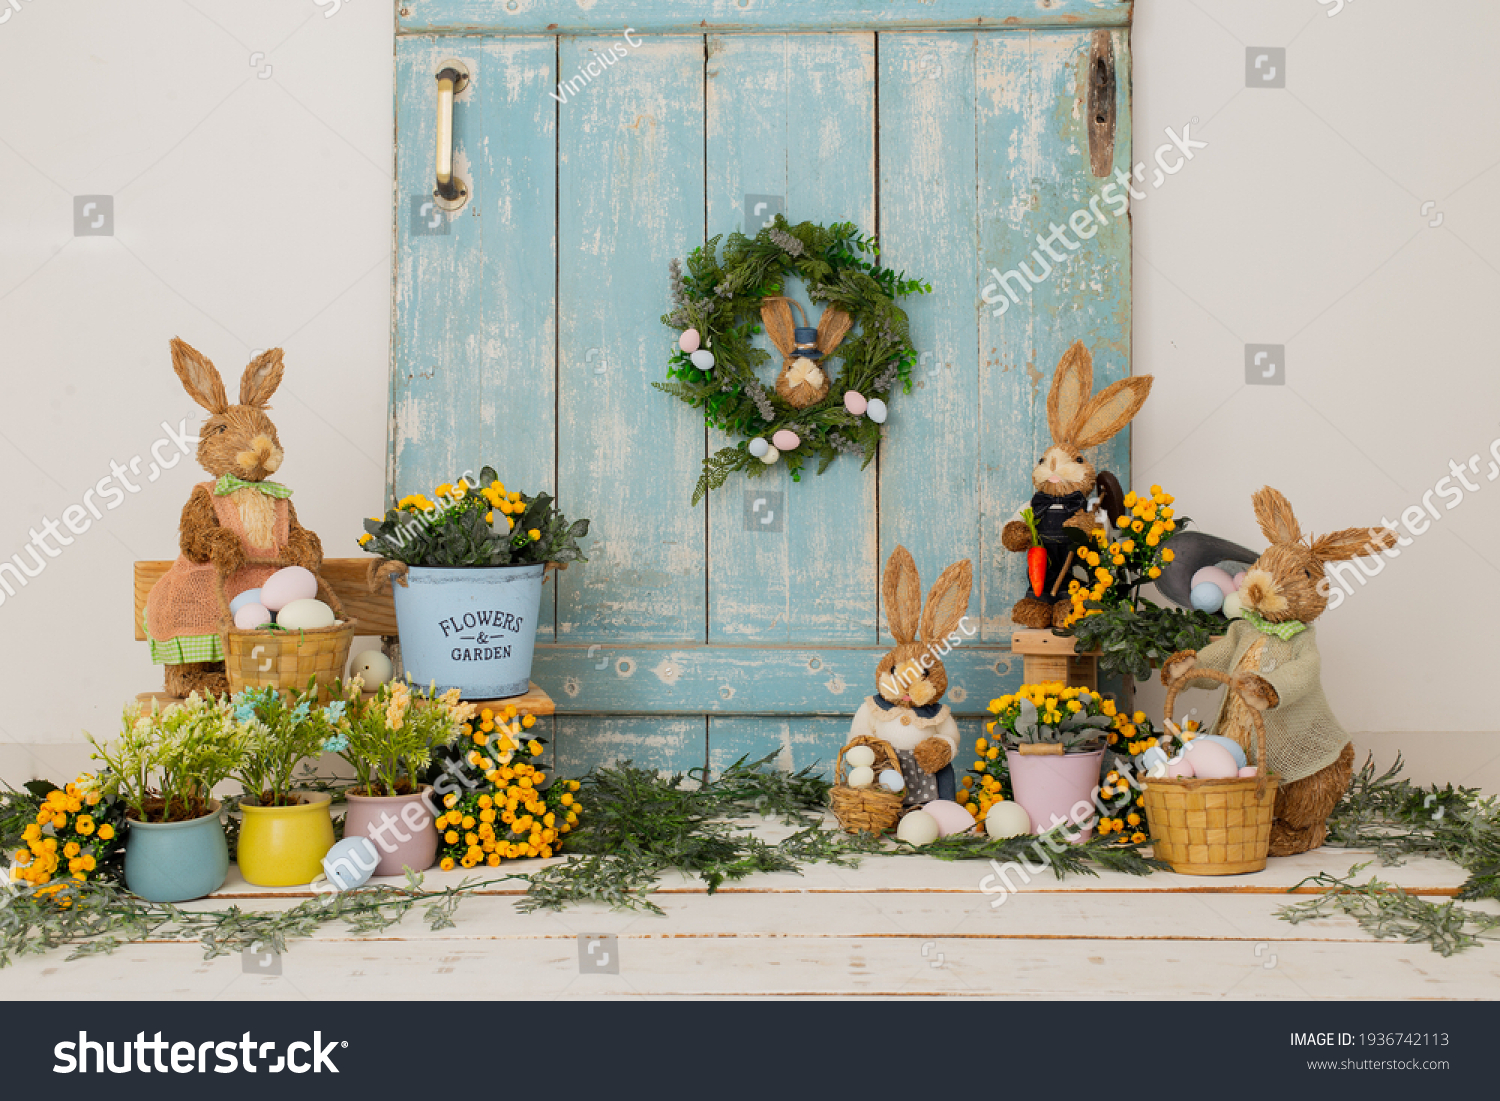 Easter backdrop or background for photo mini session in blue color. Contains straw rabbits and eggs basket. #1936742113